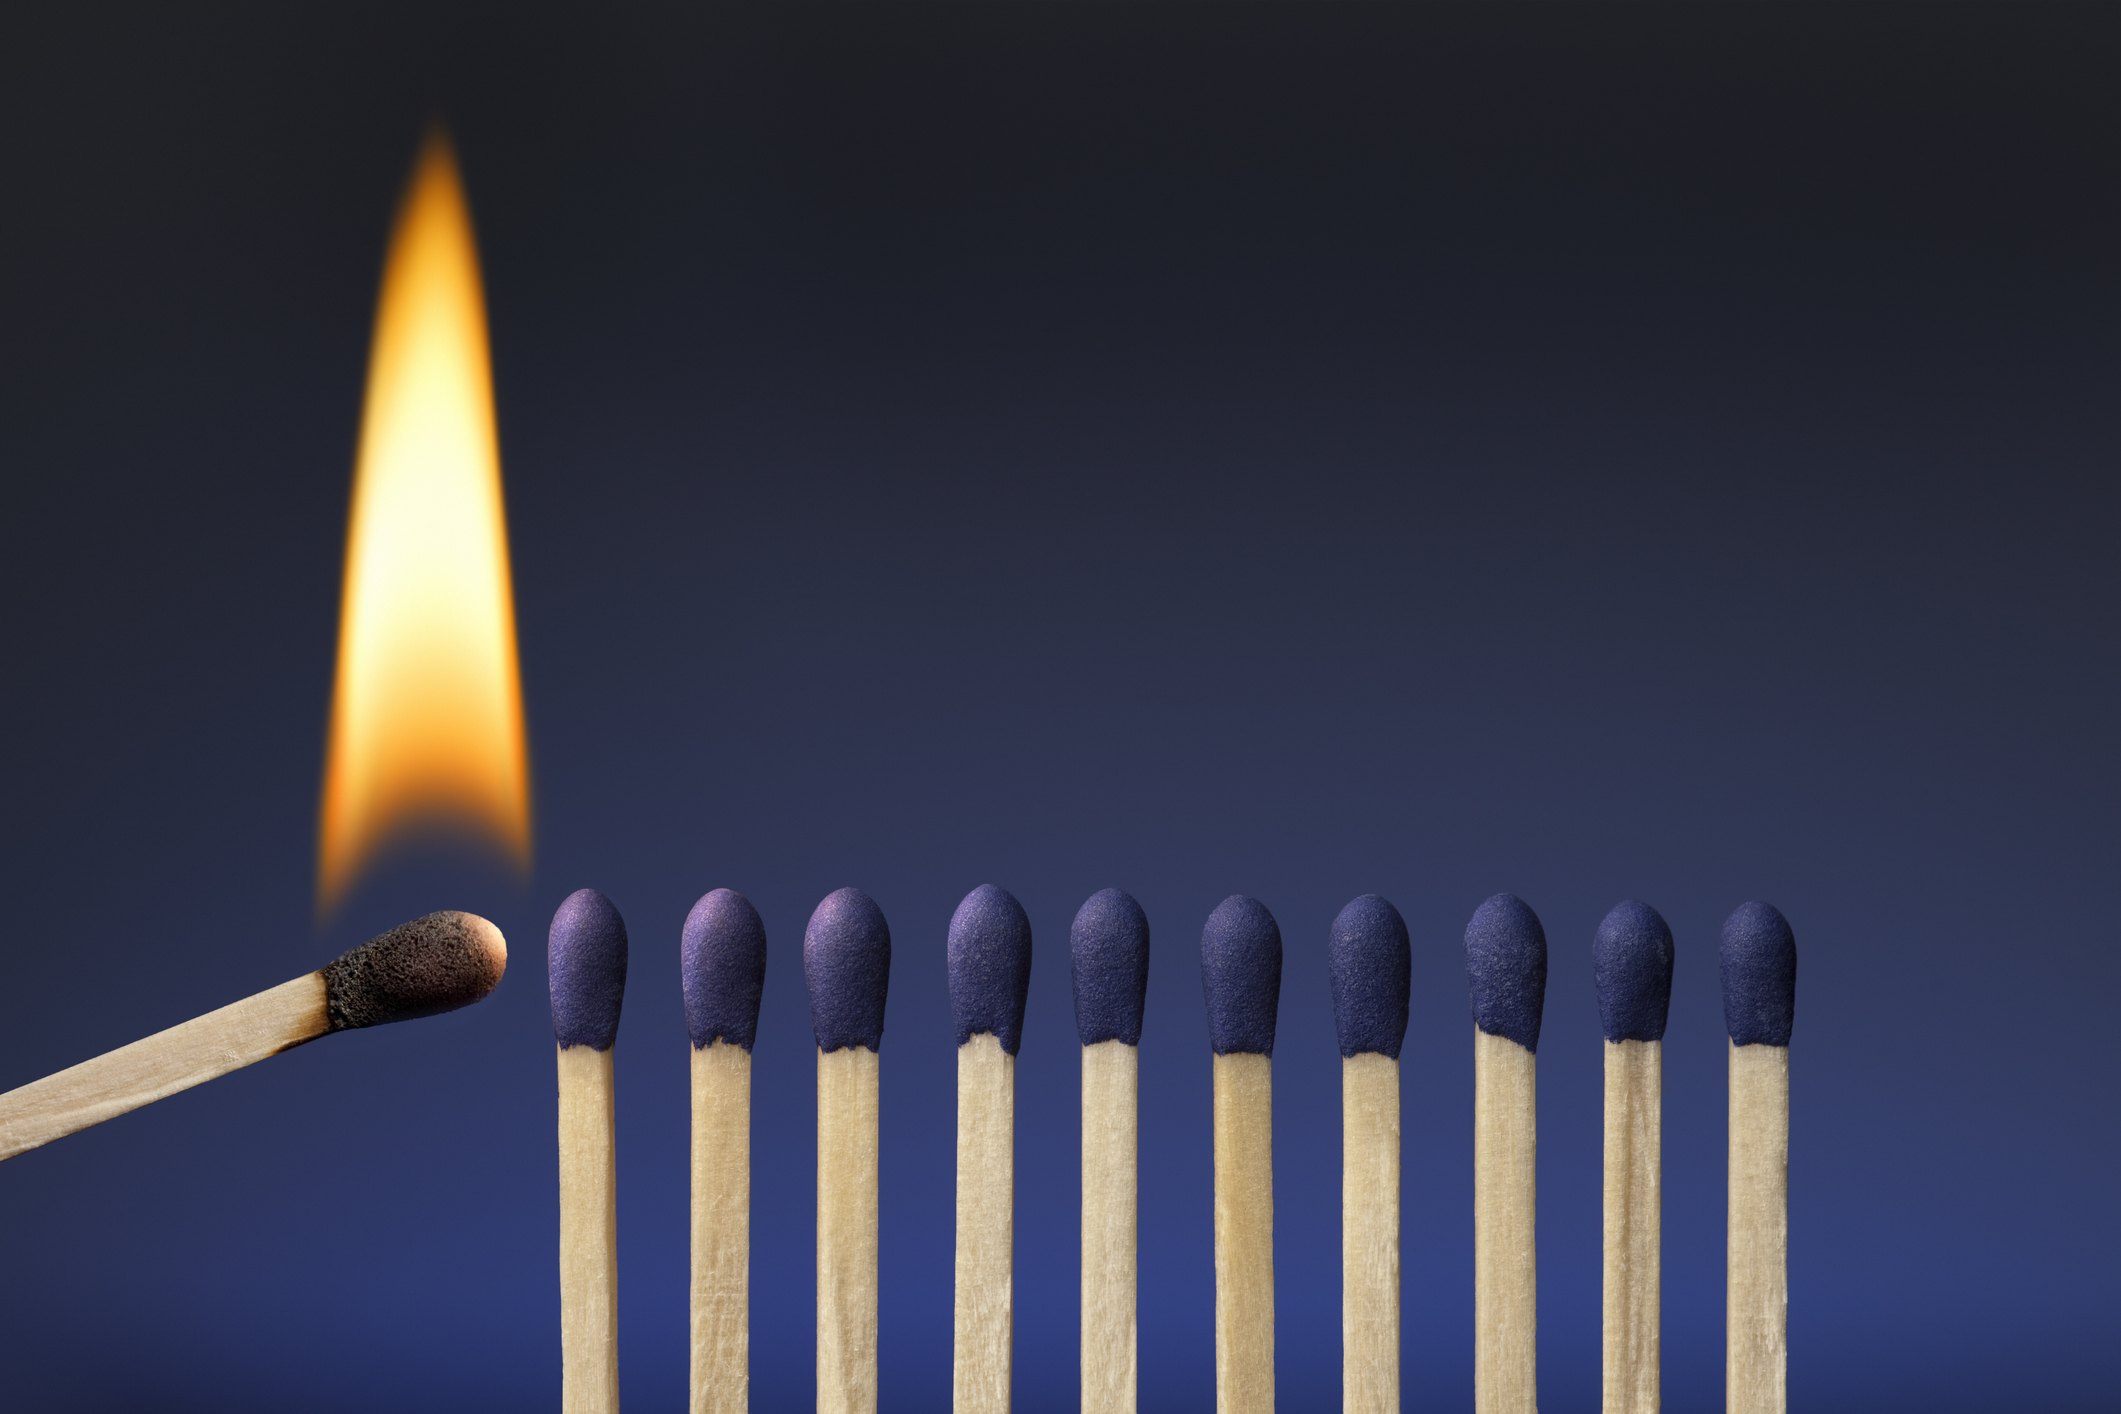 lighting matches;  product-based sales